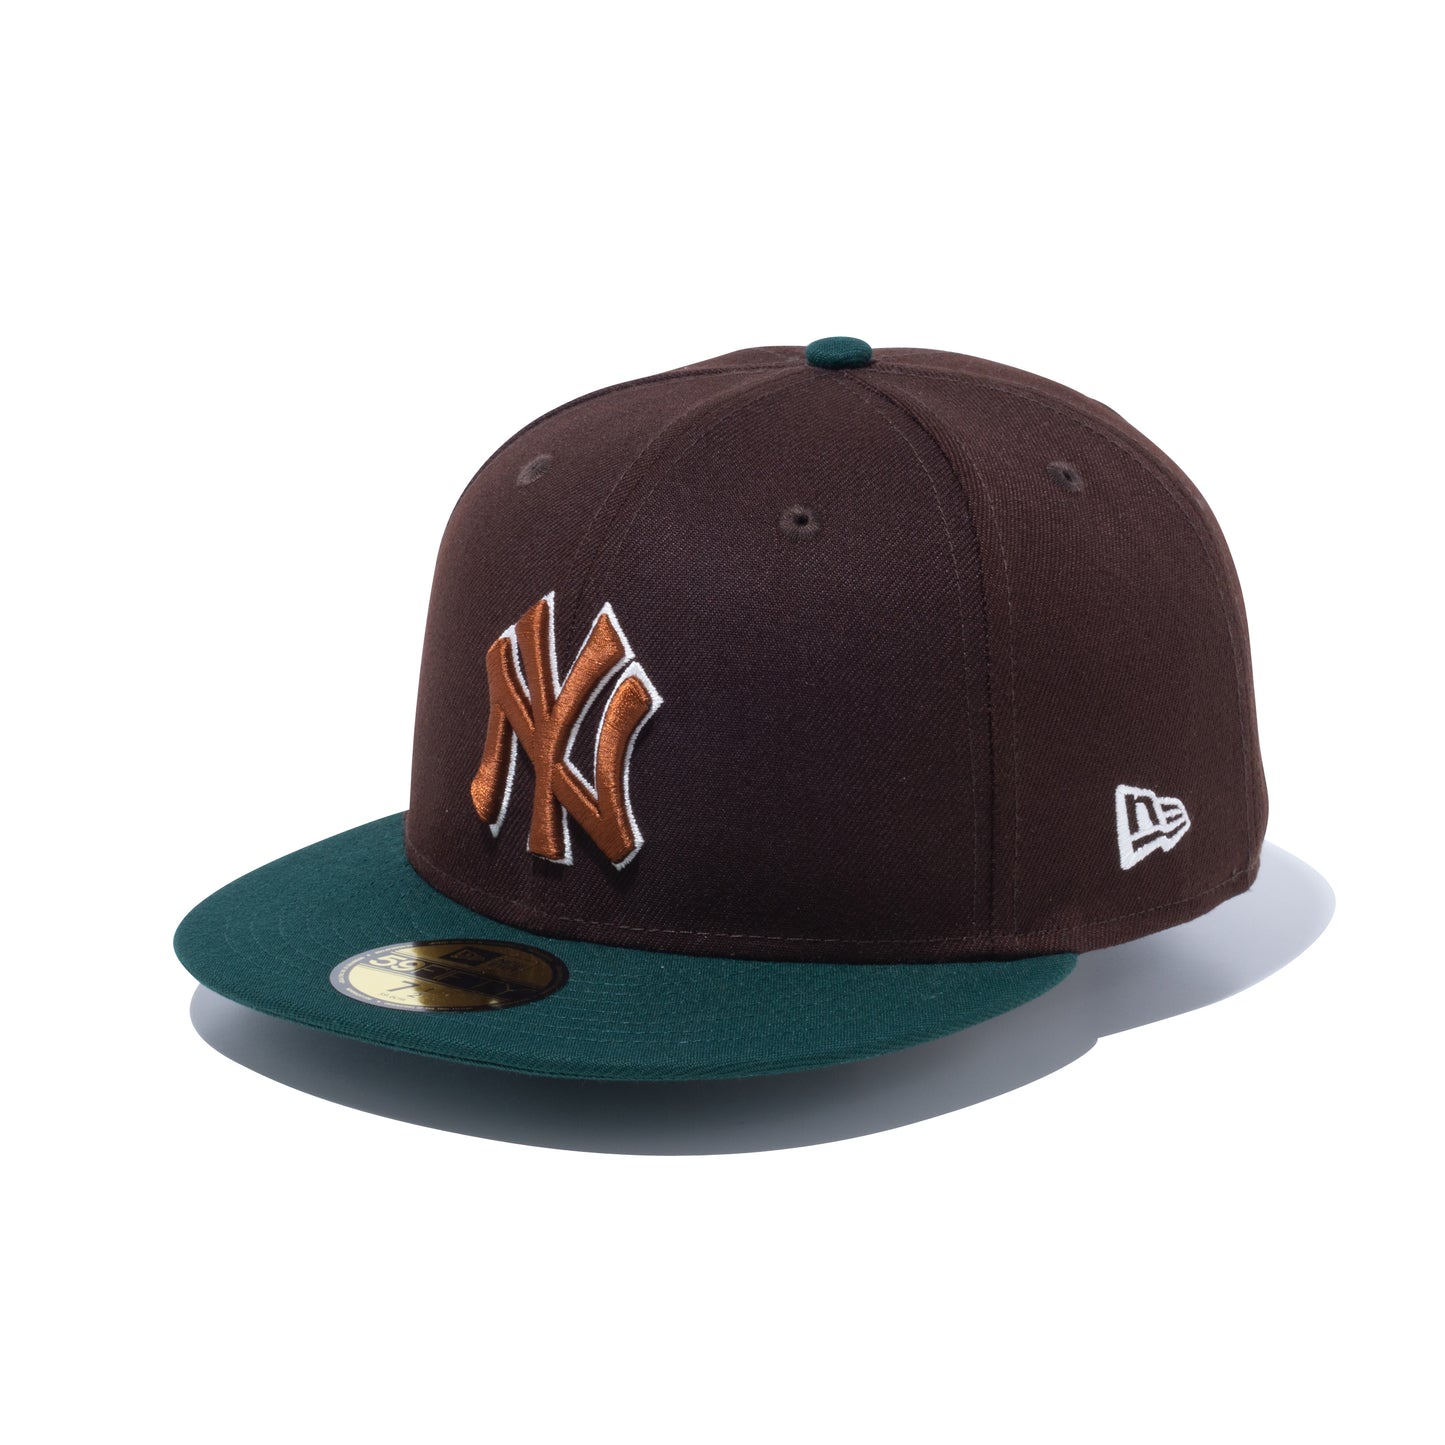 NEW YORK YANKEES 59FIFTY "BEEF AND BROCCORLI"